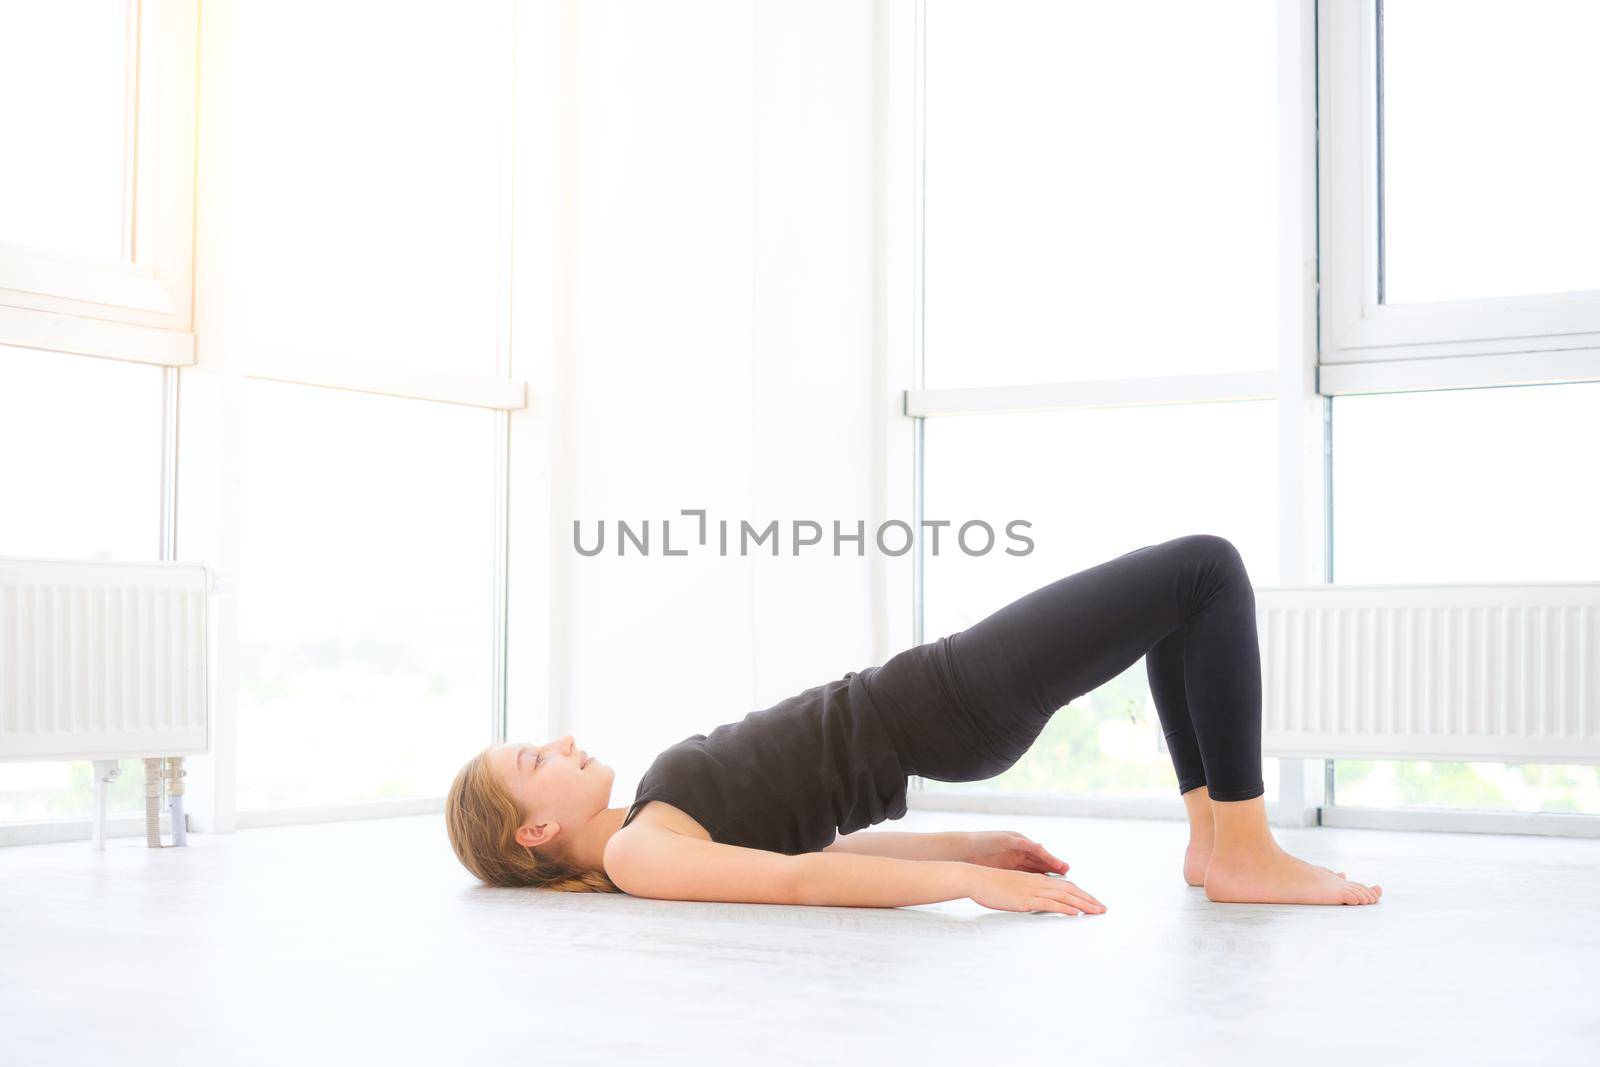 Pretty young girl doing exercises on a floor in white room